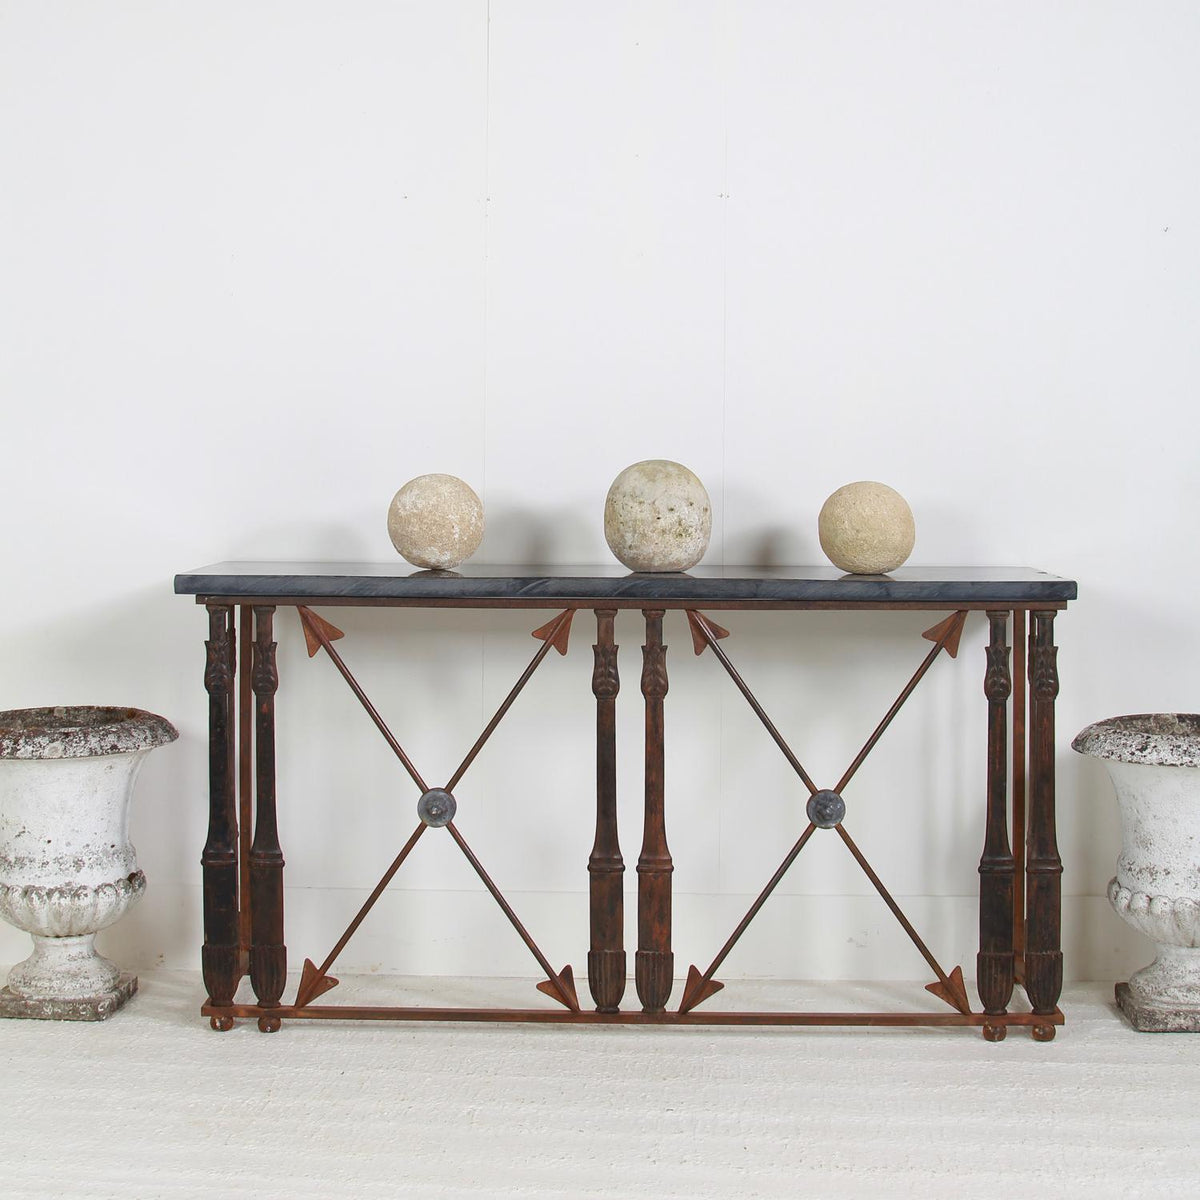 HUGE FRENCH 19TH CENTURY IRON & STONE CONSOLE TABLE